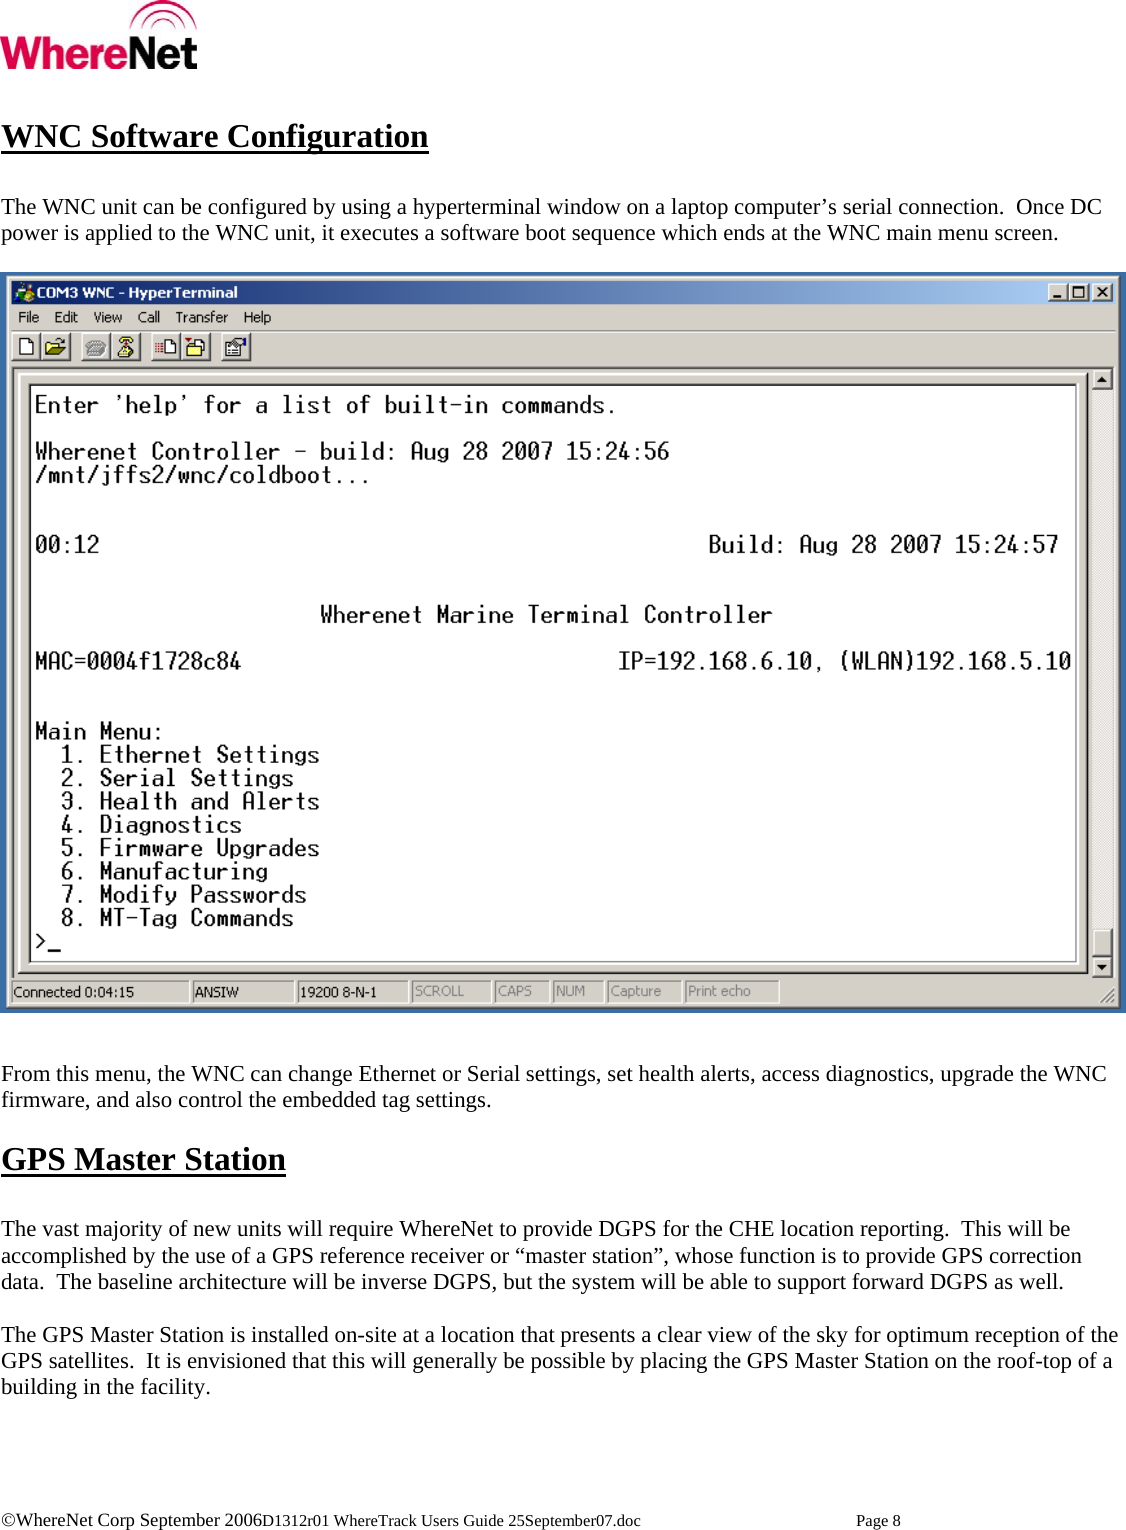    ©WhereNet Corp September 2006D1312r01 WhereTrack Users Guide 25September07.doc  Page 8  WNC Software Configuration  The WNC unit can be configured by using a hyperterminal window on a laptop computer’s serial connection.  Once DC power is applied to the WNC unit, it executes a software boot sequence which ends at the WNC main menu screen.     From this menu, the WNC can change Ethernet or Serial settings, set health alerts, access diagnostics, upgrade the WNC firmware, and also control the embedded tag settings.  GPS Master Station  The vast majority of new units will require WhereNet to provide DGPS for the CHE location reporting.  This will be accomplished by the use of a GPS reference receiver or “master station”, whose function is to provide GPS correction data.  The baseline architecture will be inverse DGPS, but the system will be able to support forward DGPS as well.  The GPS Master Station is installed on-site at a location that presents a clear view of the sky for optimum reception of the GPS satellites.  It is envisioned that this will generally be possible by placing the GPS Master Station on the roof-top of a building in the facility.  